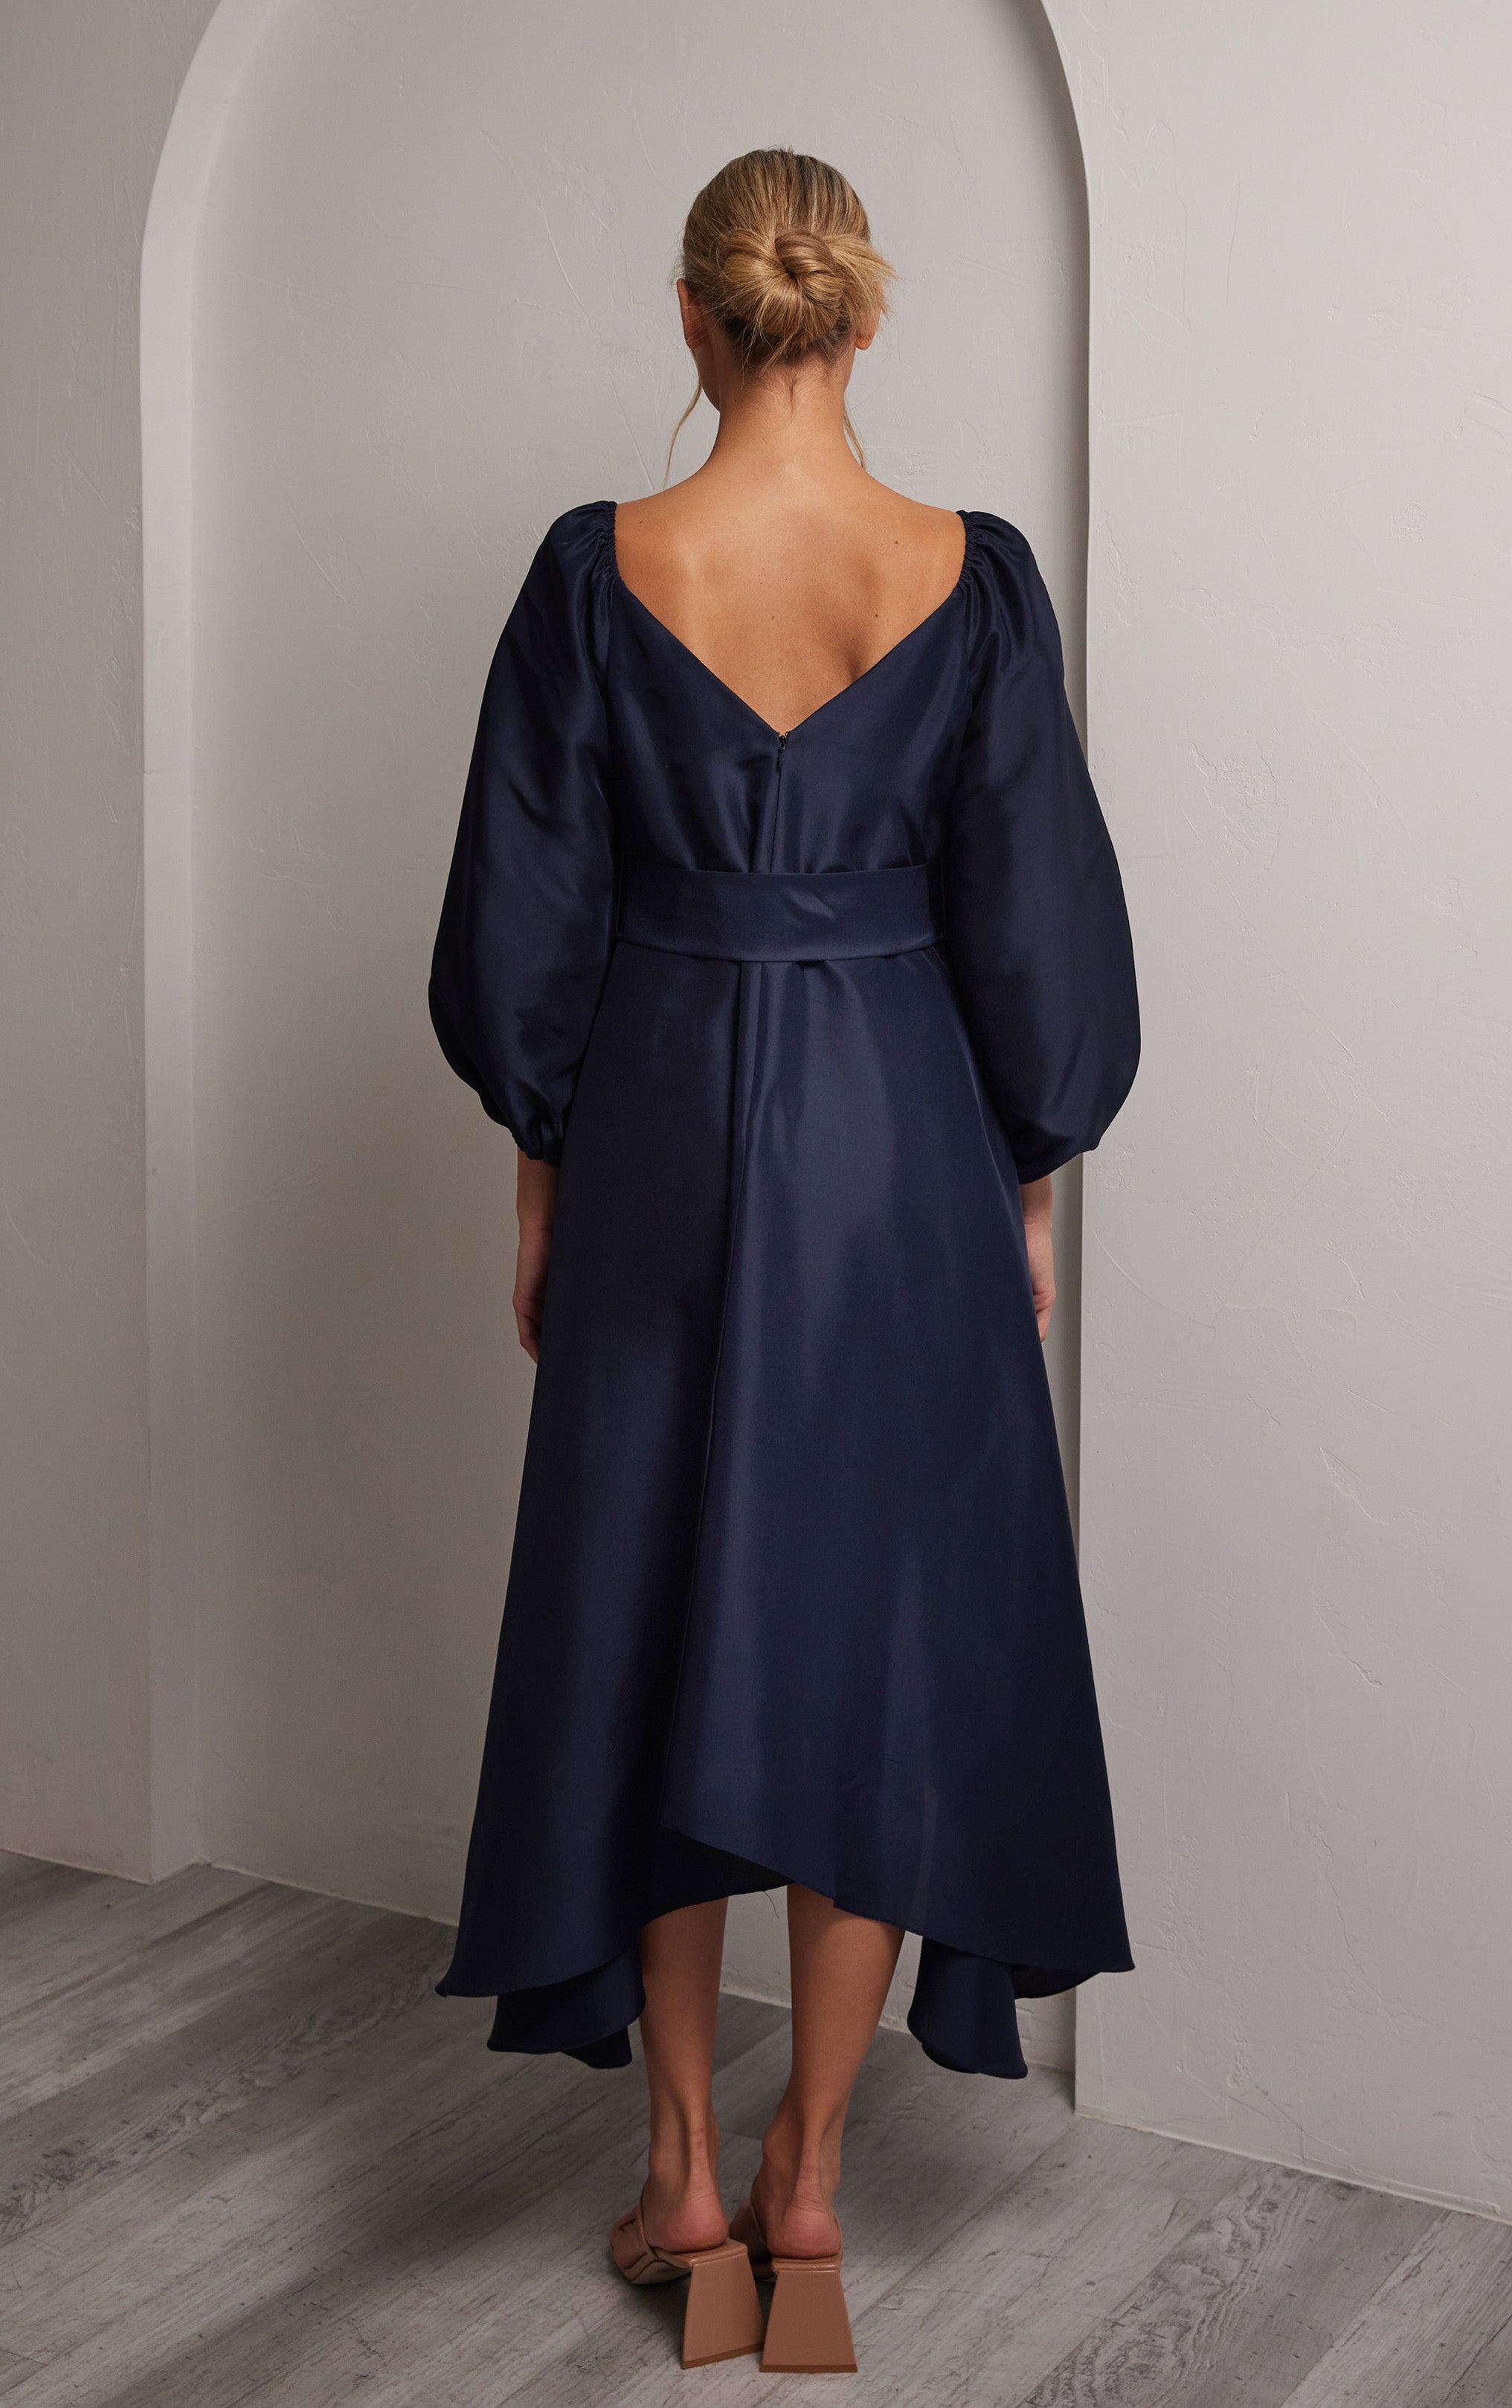 back view of woman wearing silk navy dress with puffed sleeves and tie at front